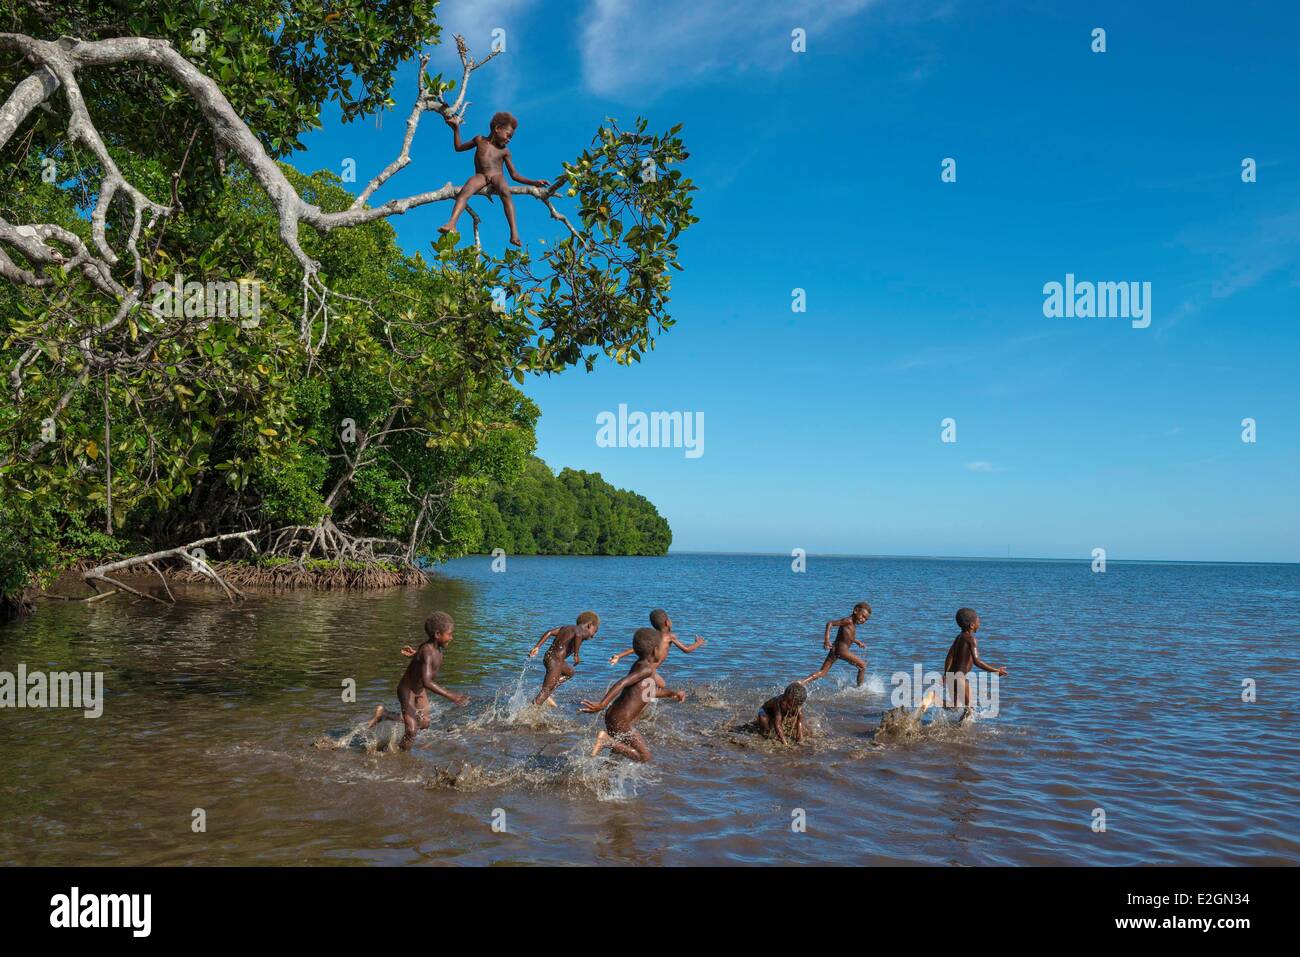 Papua New Guinea New Britain island West New Britain province Cap Gloucester district Kimbe area Akonga village kid playing in mangrove swamp Stock Photo